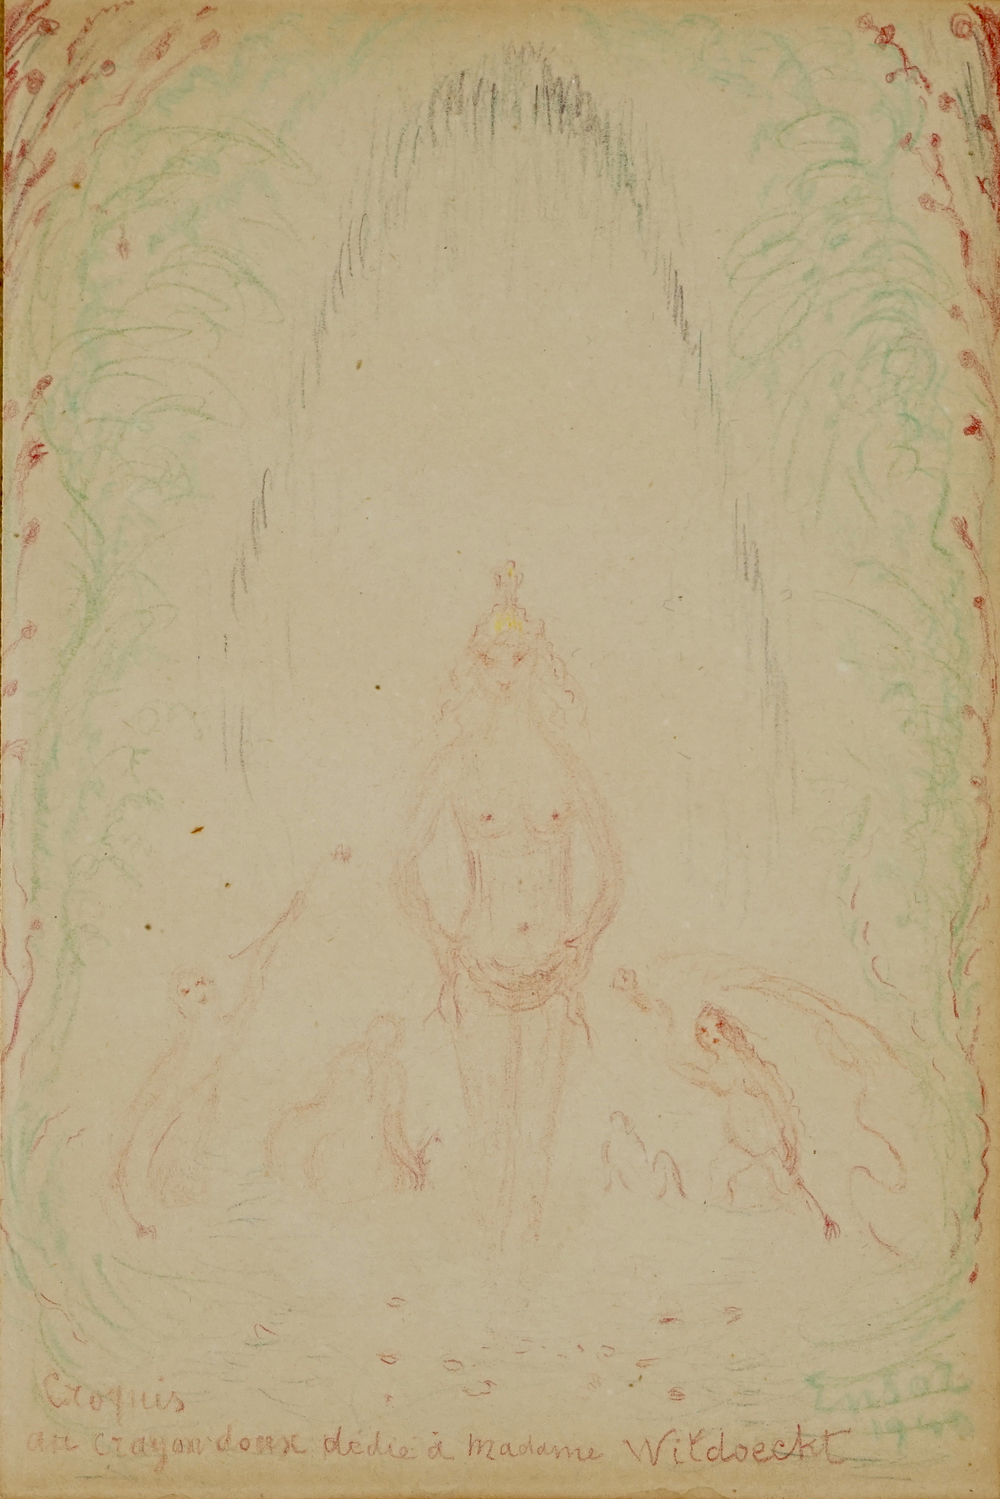 James Ensor (1860-1949), sketching, &quot;Croquis au crayon doux&quot;, signed and dedicated, dated 1940